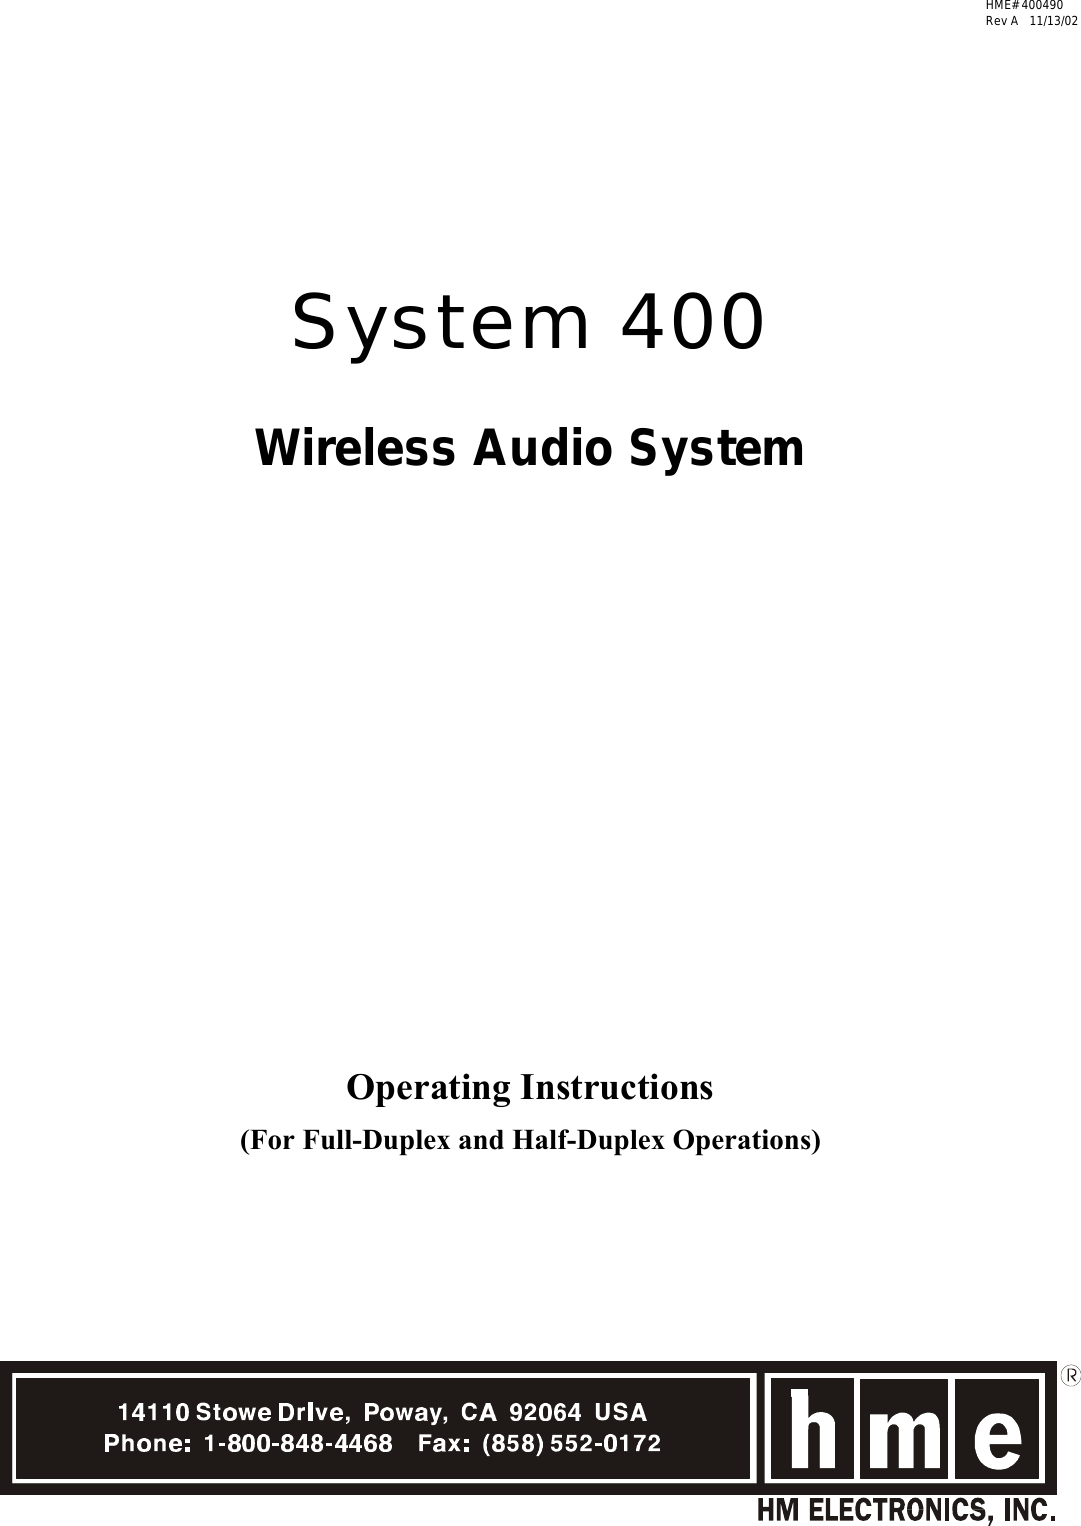  HME# 400490        Rev A   11/13/02    System 400Wireless Audio SystemOperating Instructions(For Full-Duplex and Half-Duplex Operations)